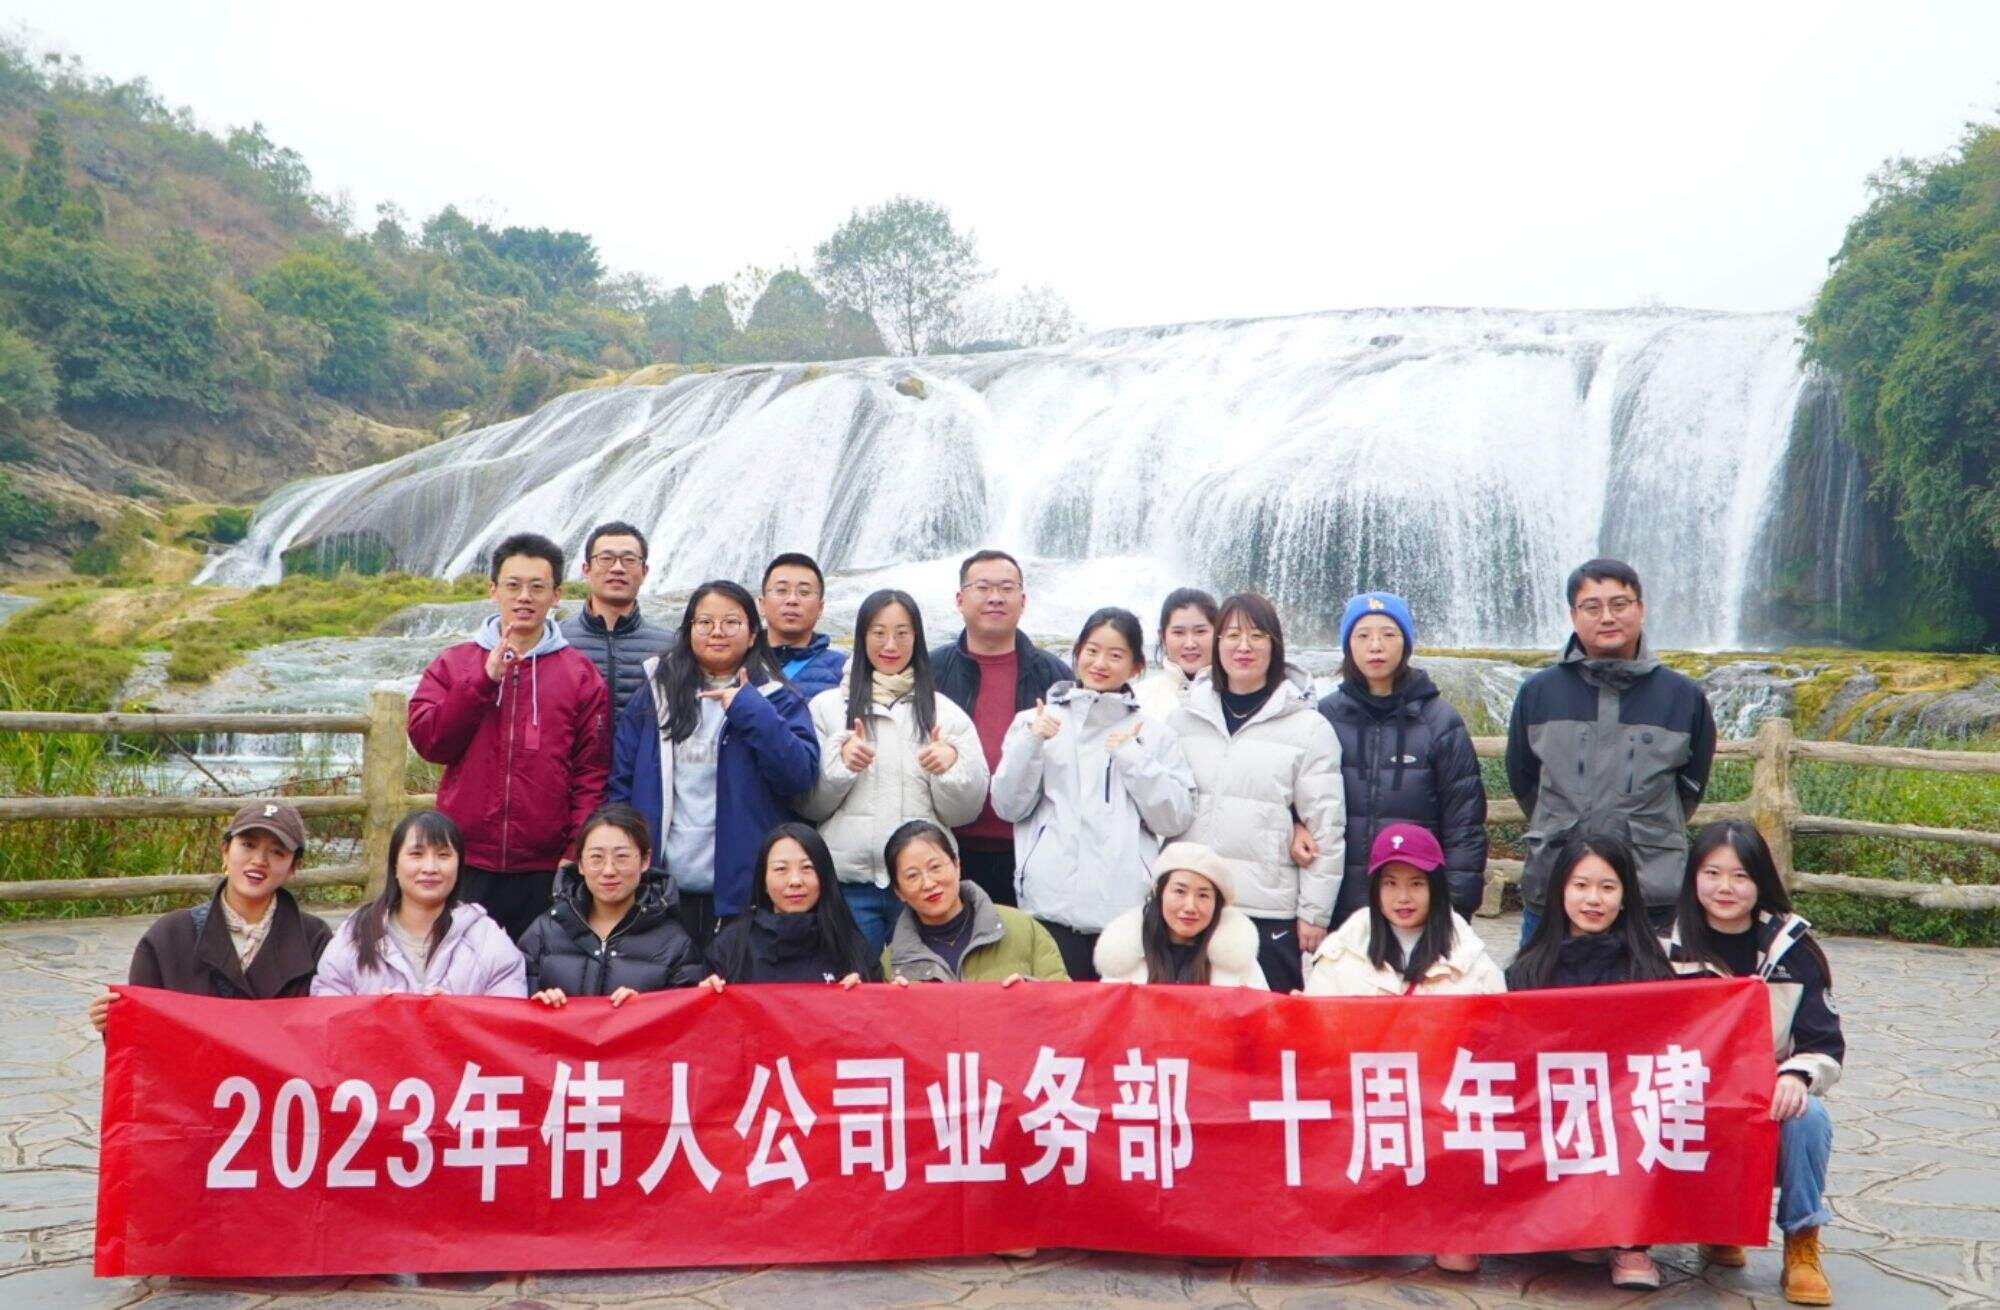 Celebrating the 10th Anniversary of Company Founding, Giant Industry Organizes Guizhou Tourism Team Building